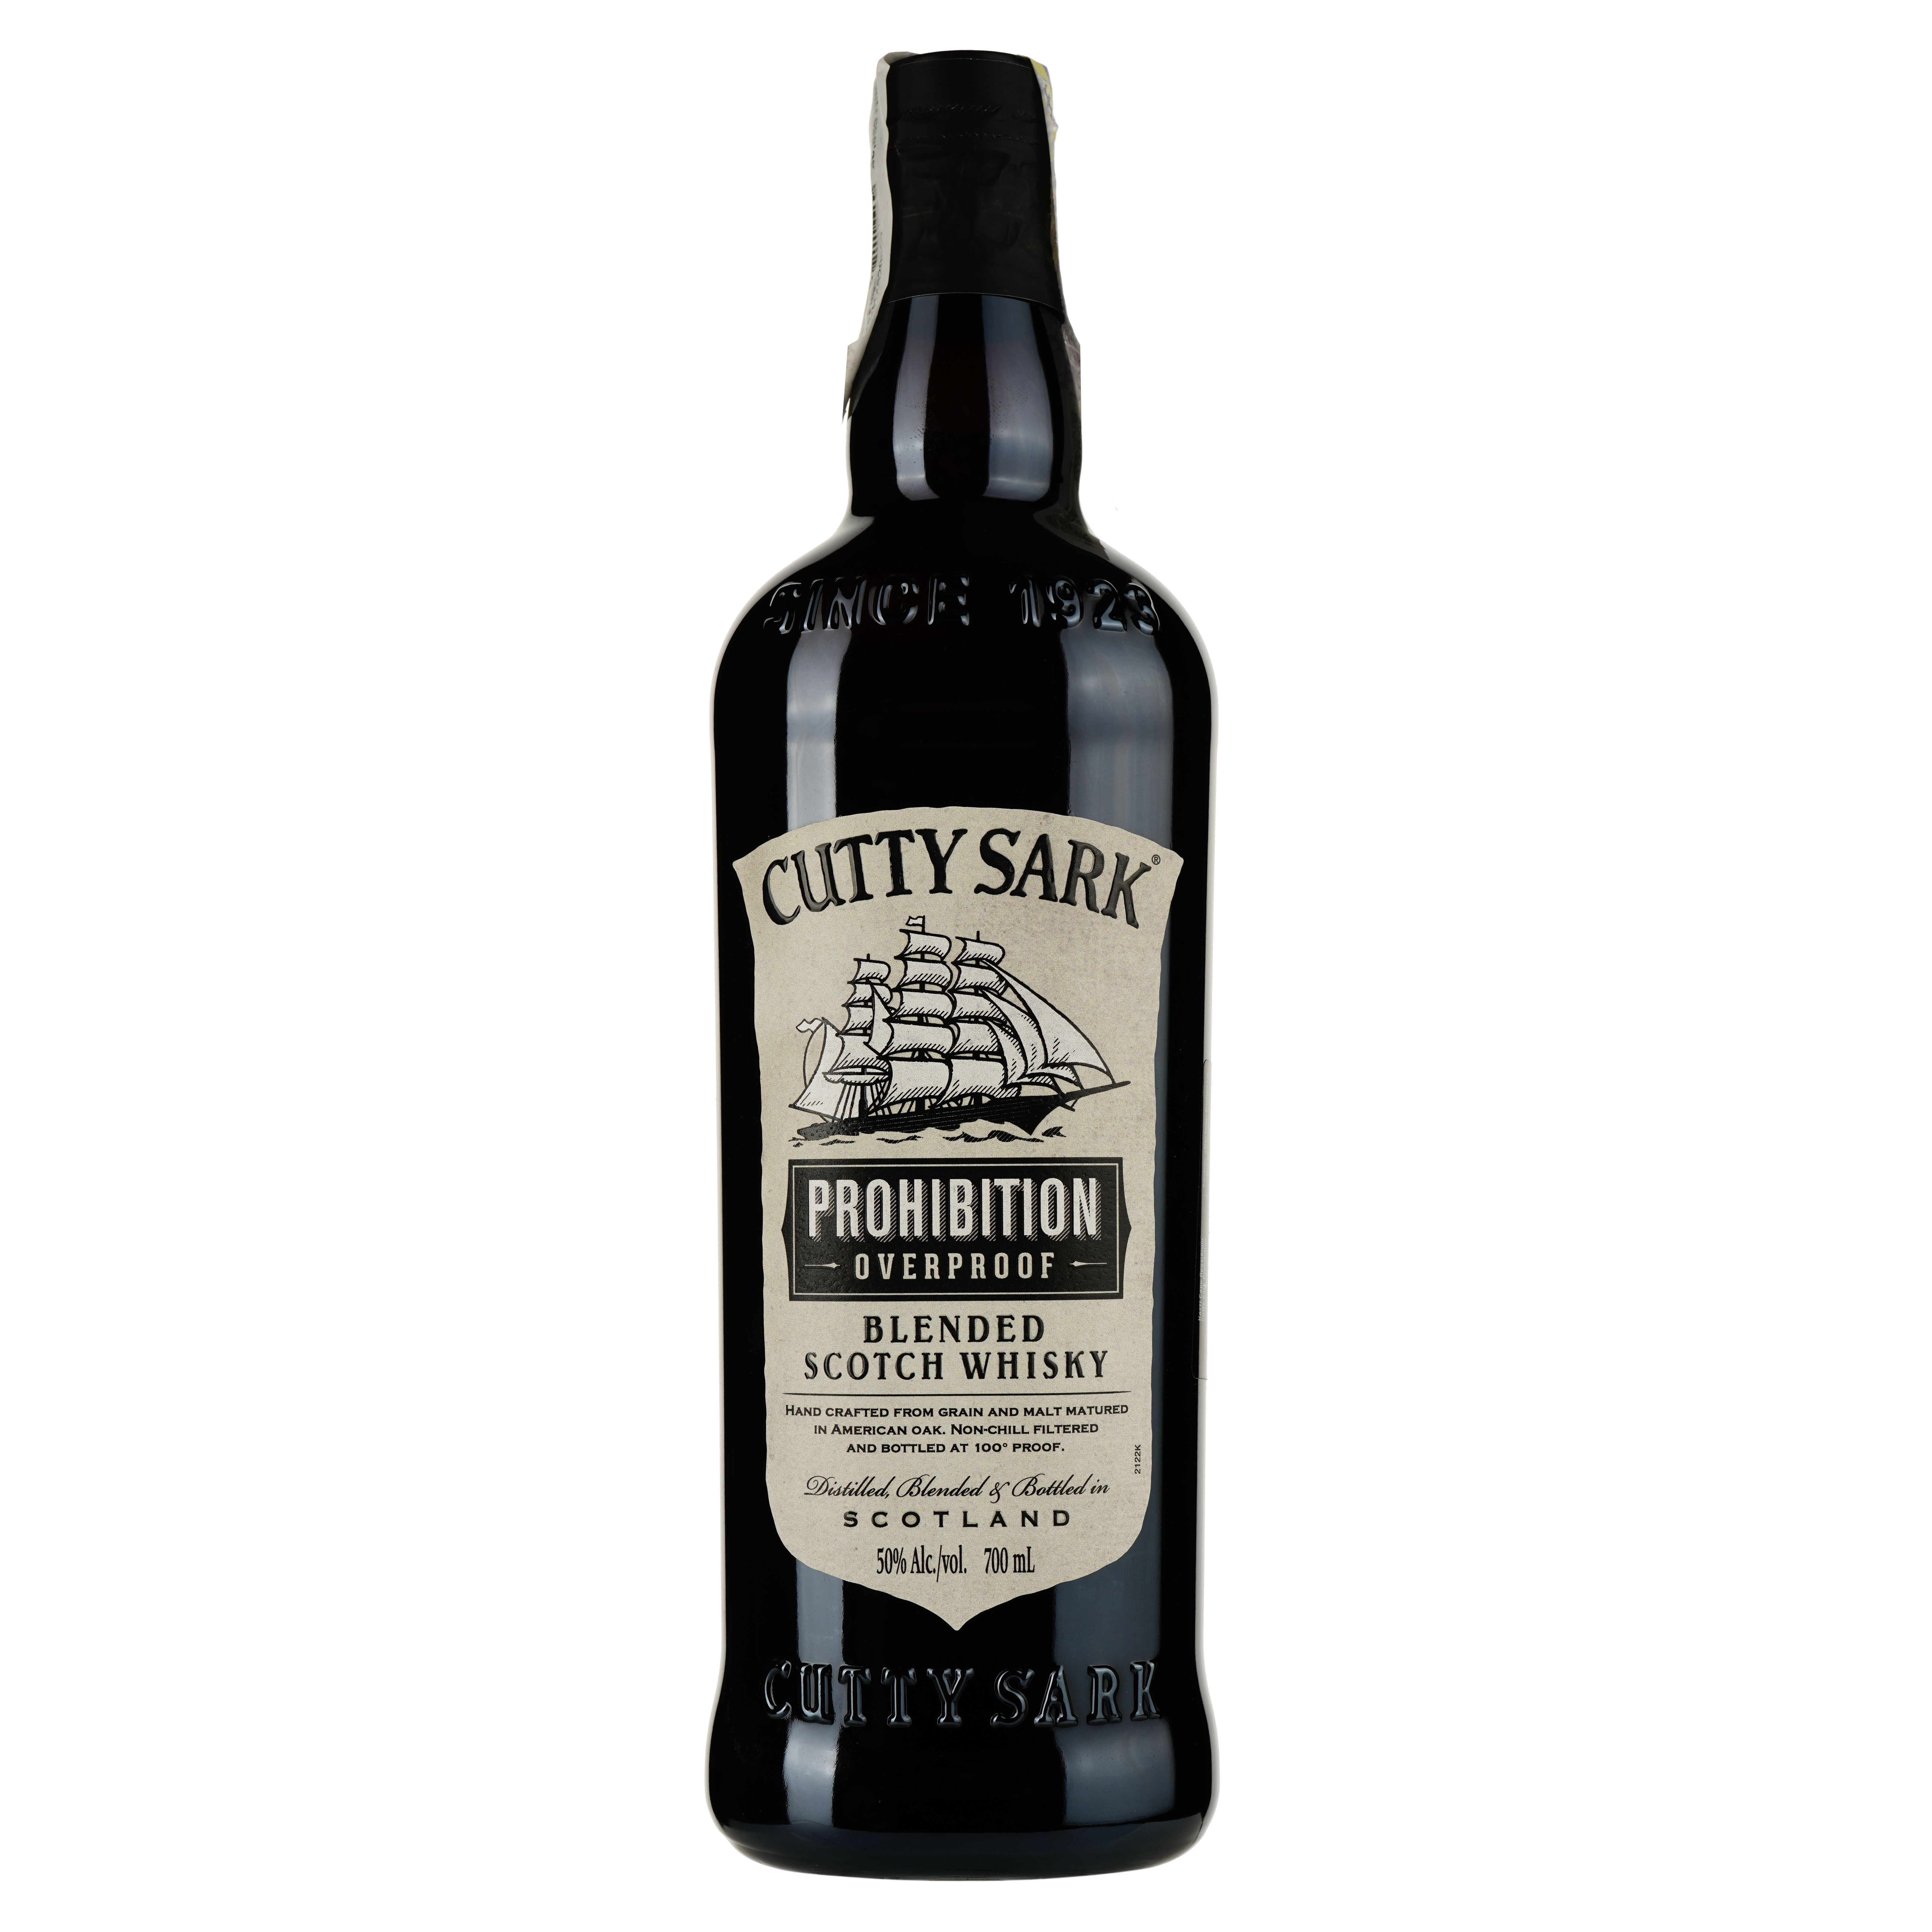 Виски Cutty Sark Prohibition Blended Scotch Whisky 50% 0.7 л - фото 1